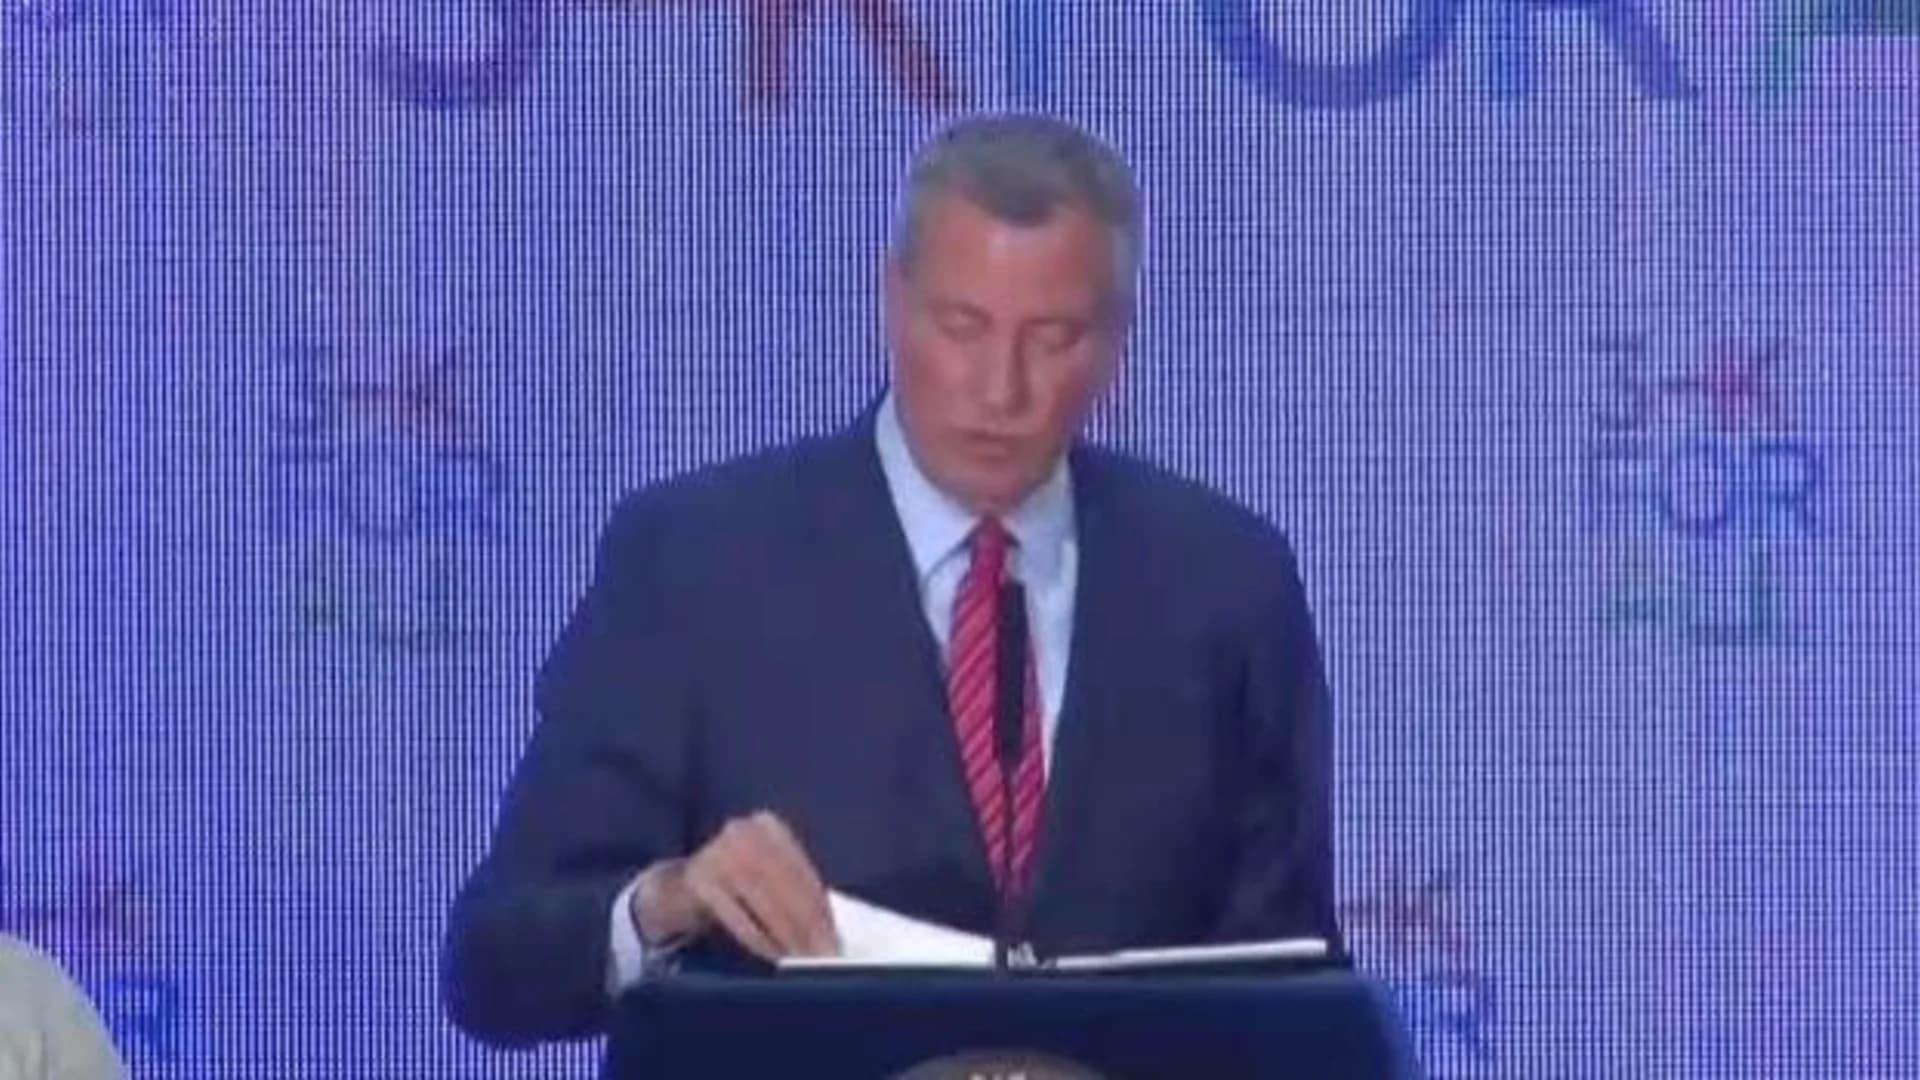 Mayor de Blasio proposes free pre-K for 3 year olds